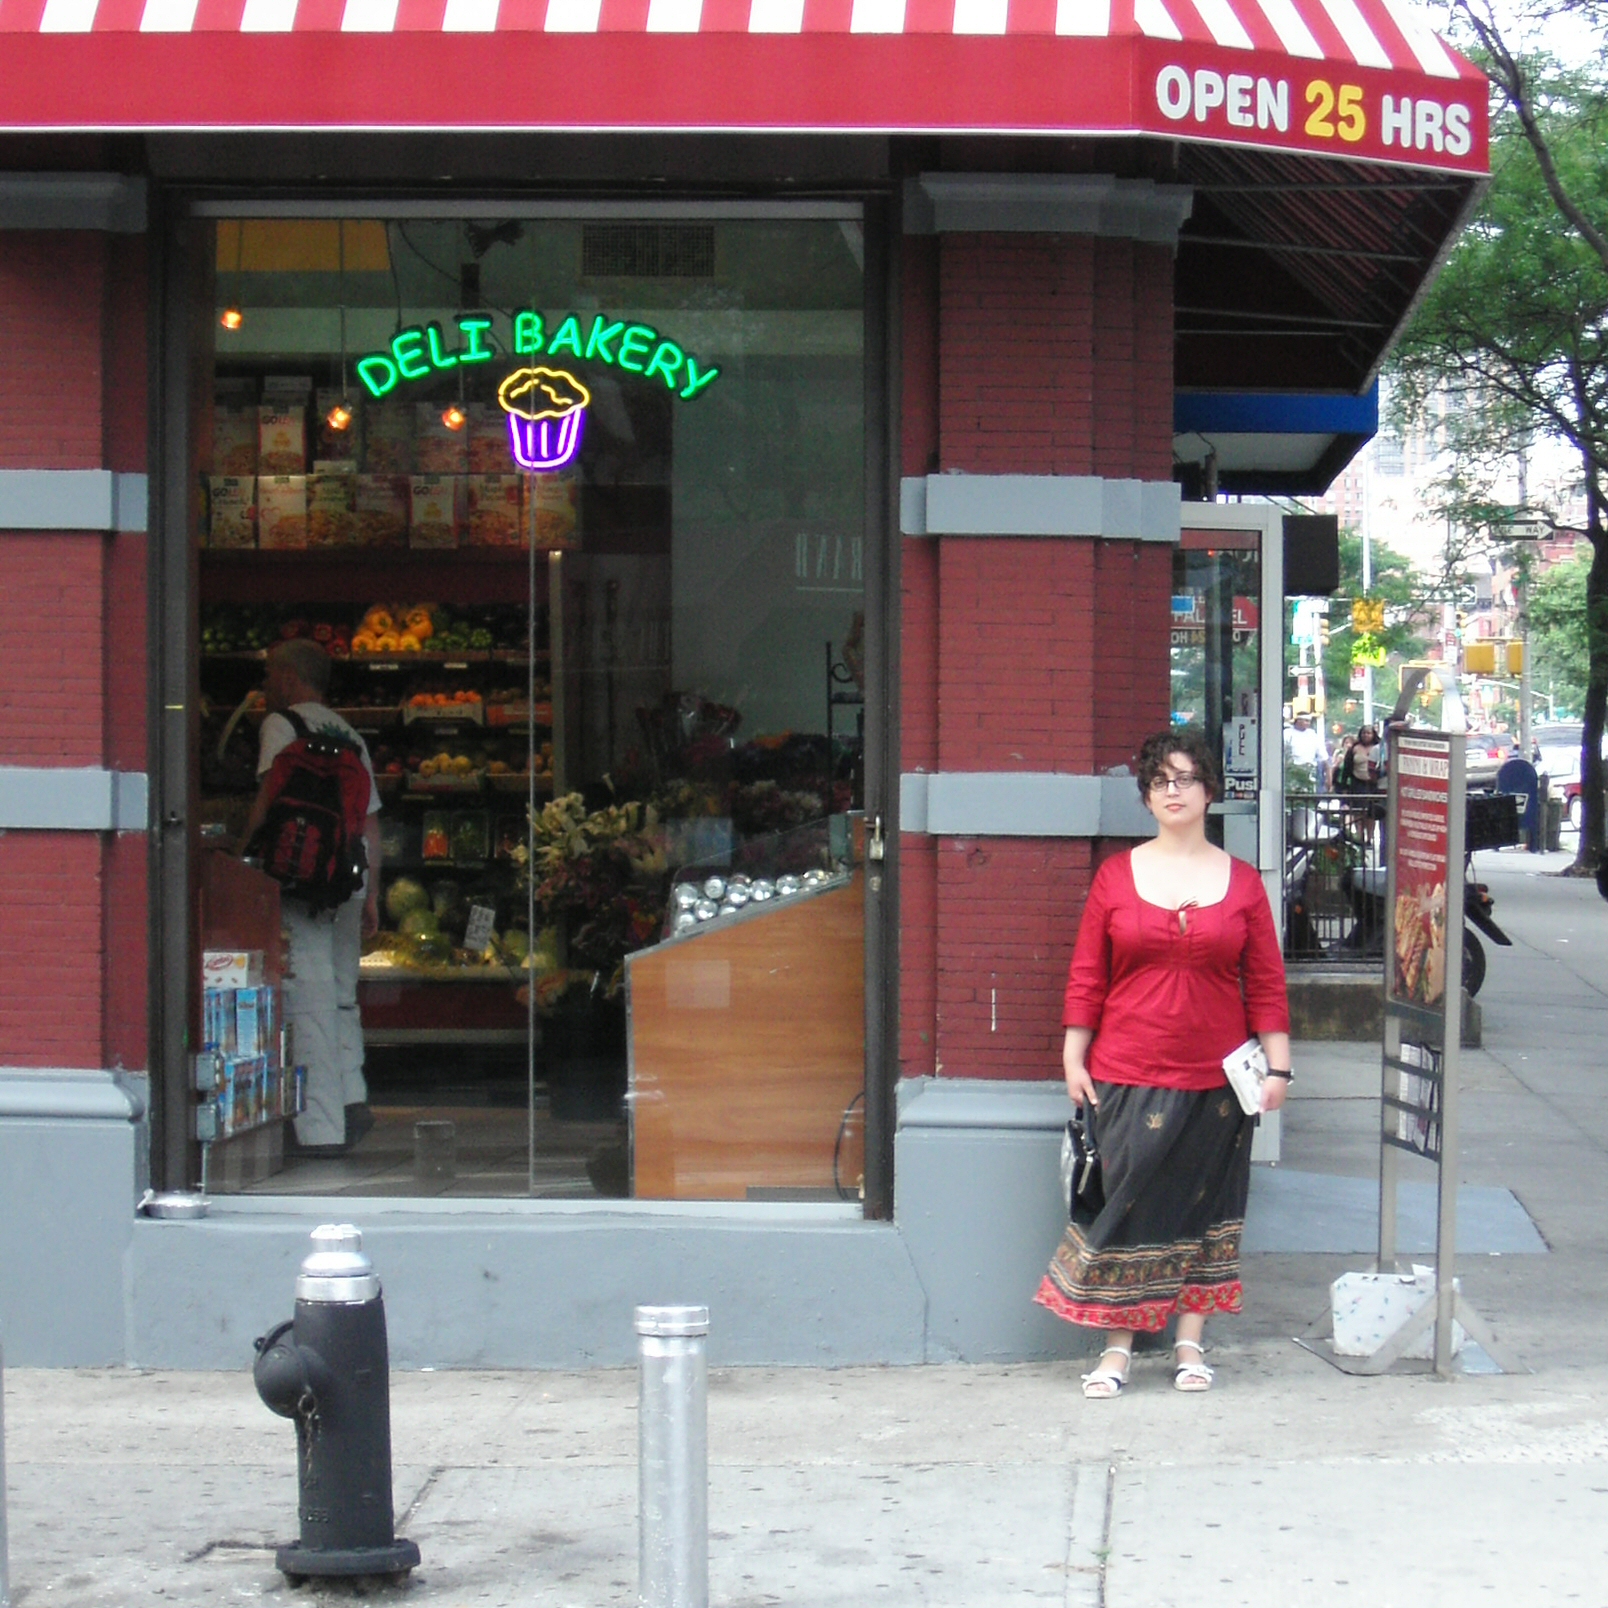 a woman standing outside of a deli bakery holding a shopping bag